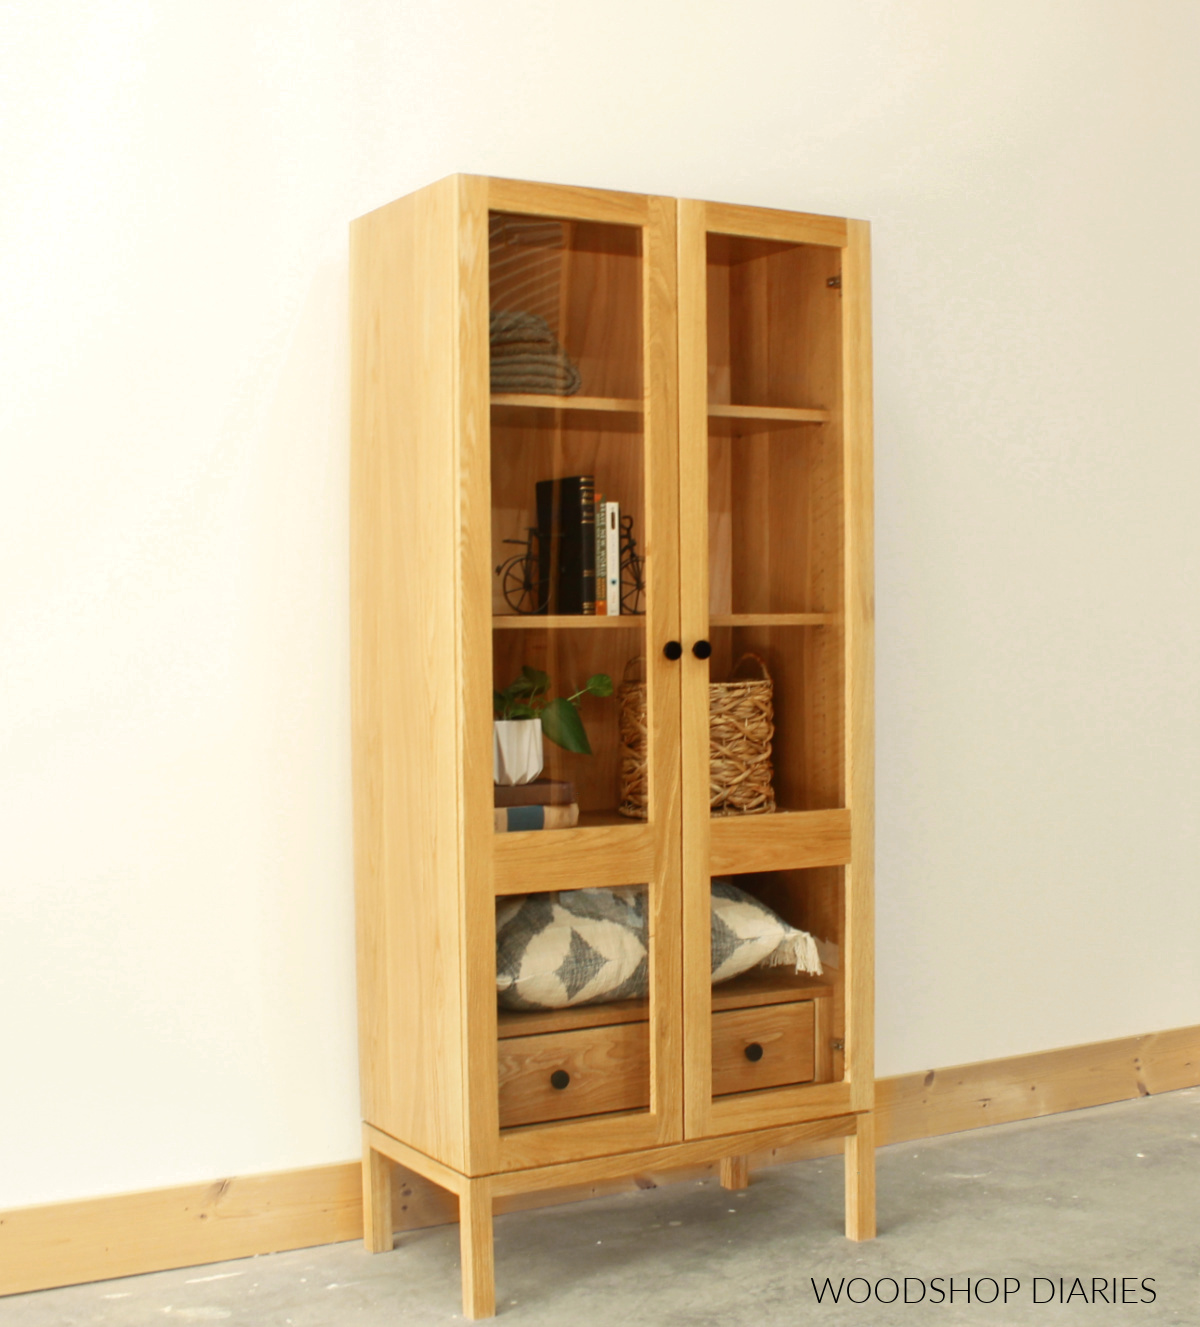 White oak cabinet with glass doors and adjustable shelves with drawer on bottom behind doors